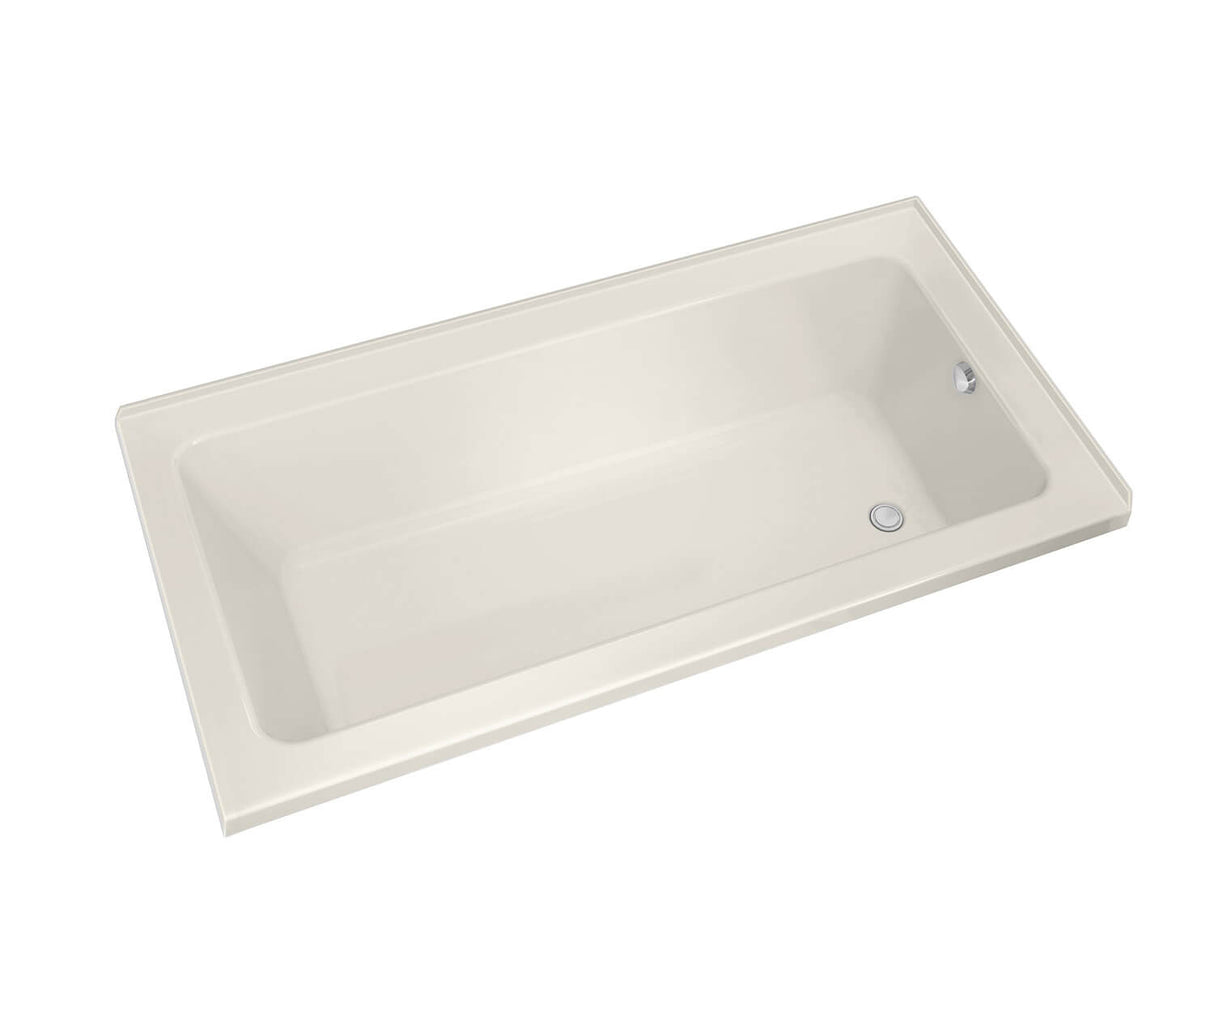 MAAX 106209-L-000-007 Pose 6636 IF Acrylic Corner Right Left-Hand Drain Bathtub in Biscuit